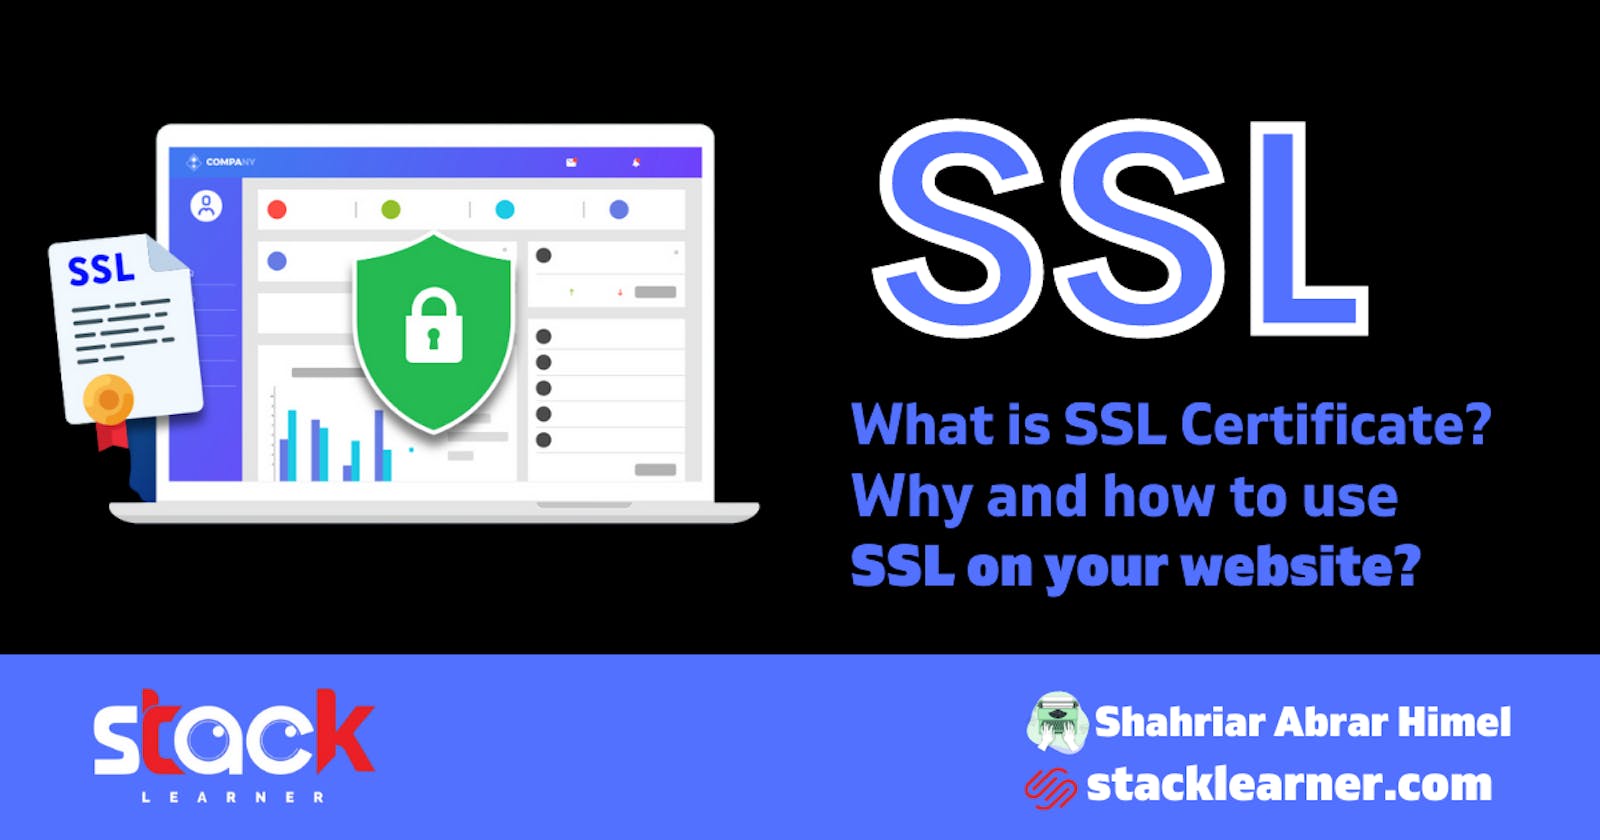 What is SSL Certificate? Why and how to use SSL on your website?